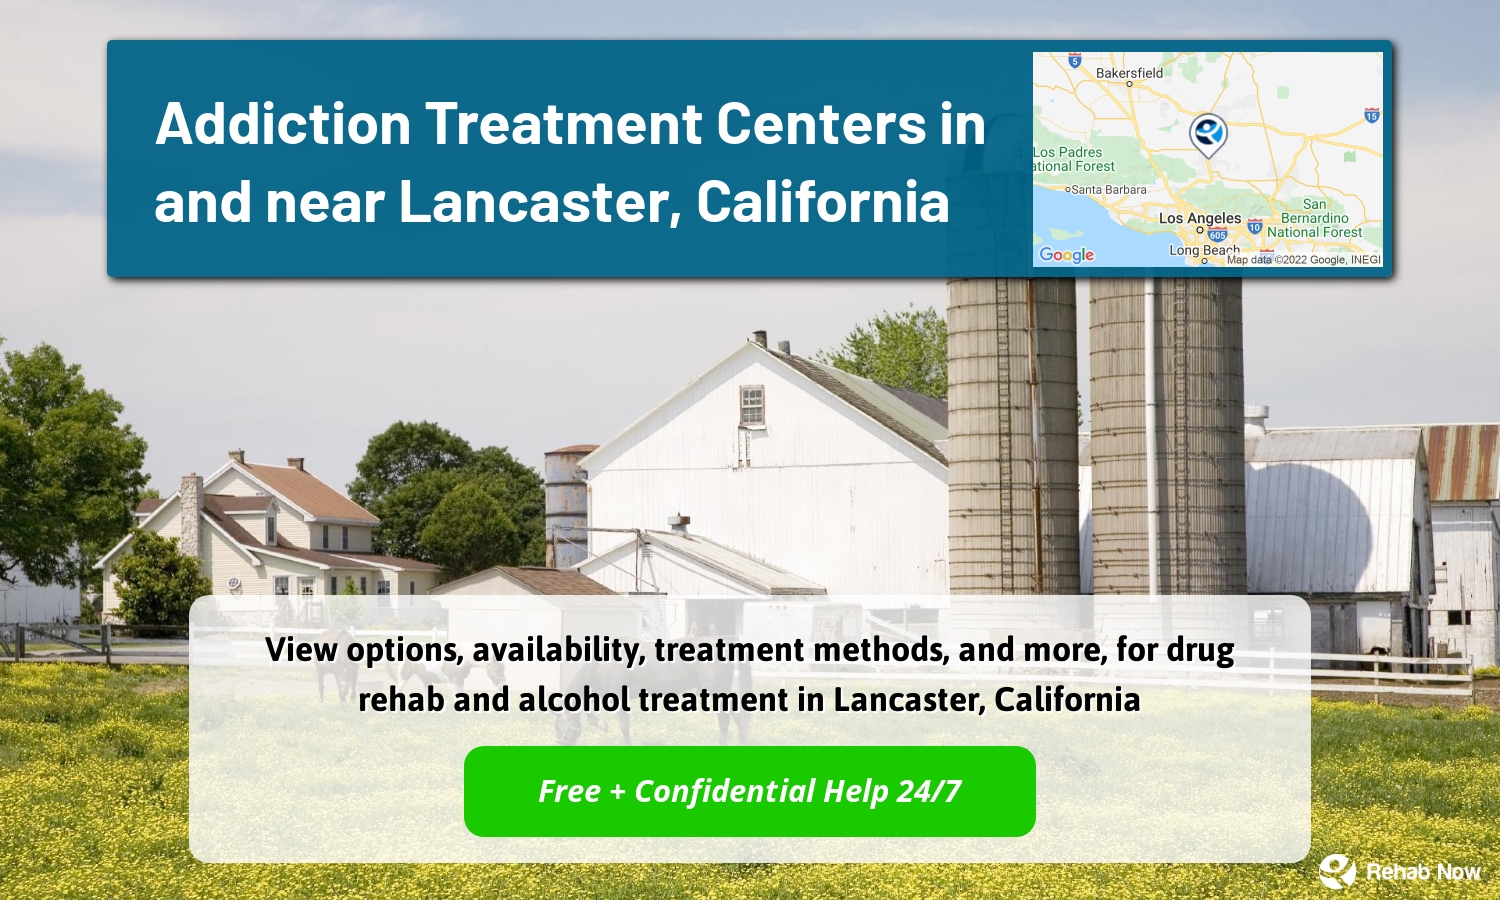 View options, availability, treatment methods, and more, for drug rehab and alcohol treatment in Lancaster, California